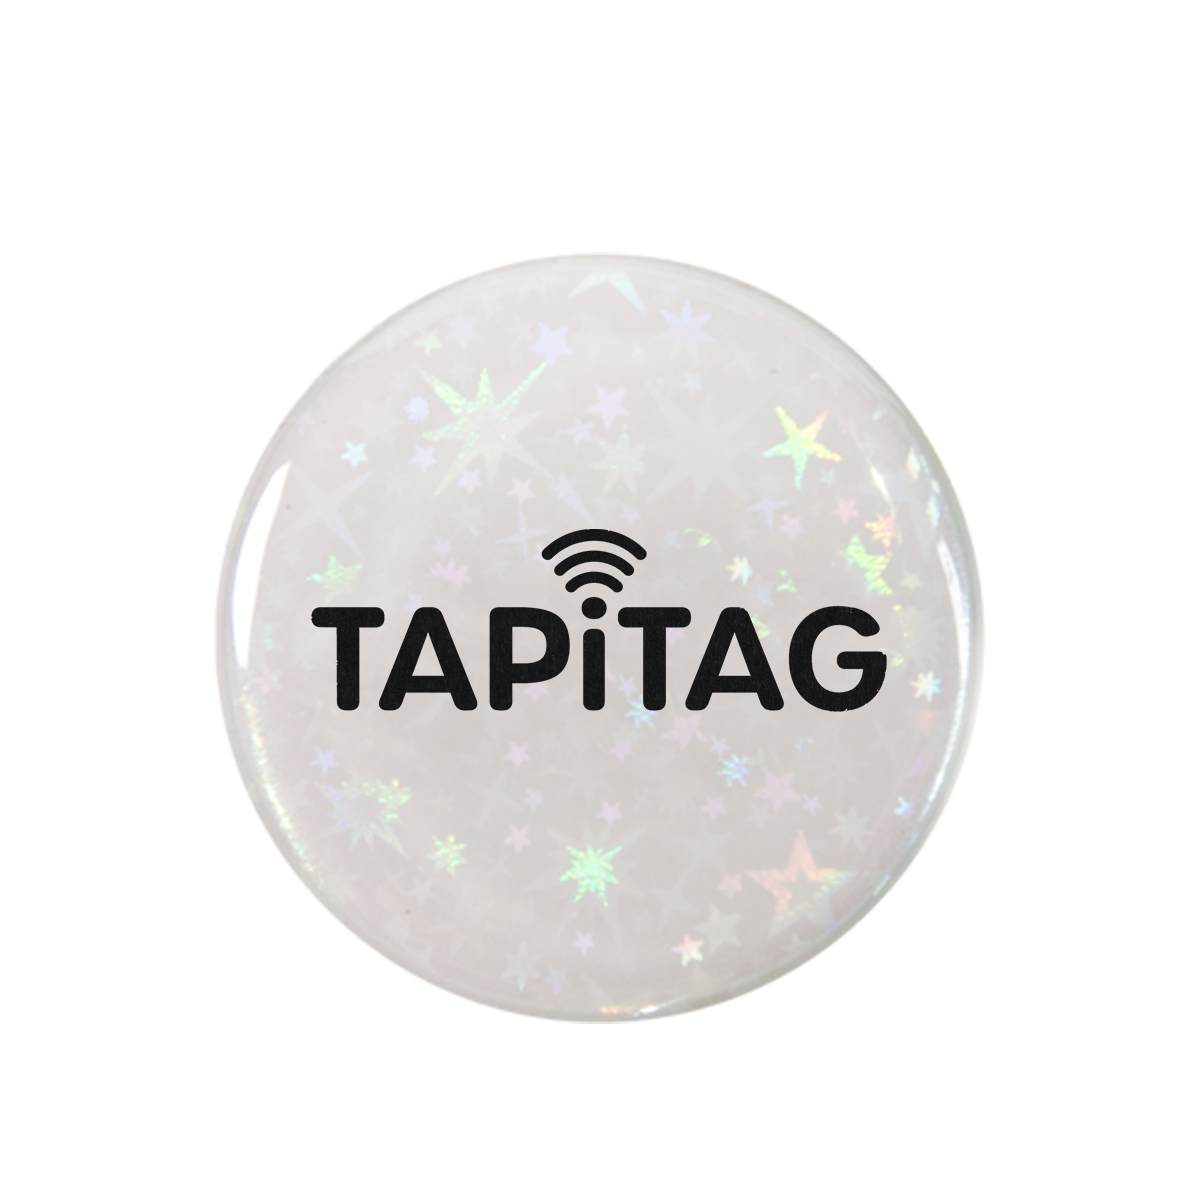 TAPITAG CONTACTLESS DIGITAL BUSINESS PHONE TAG